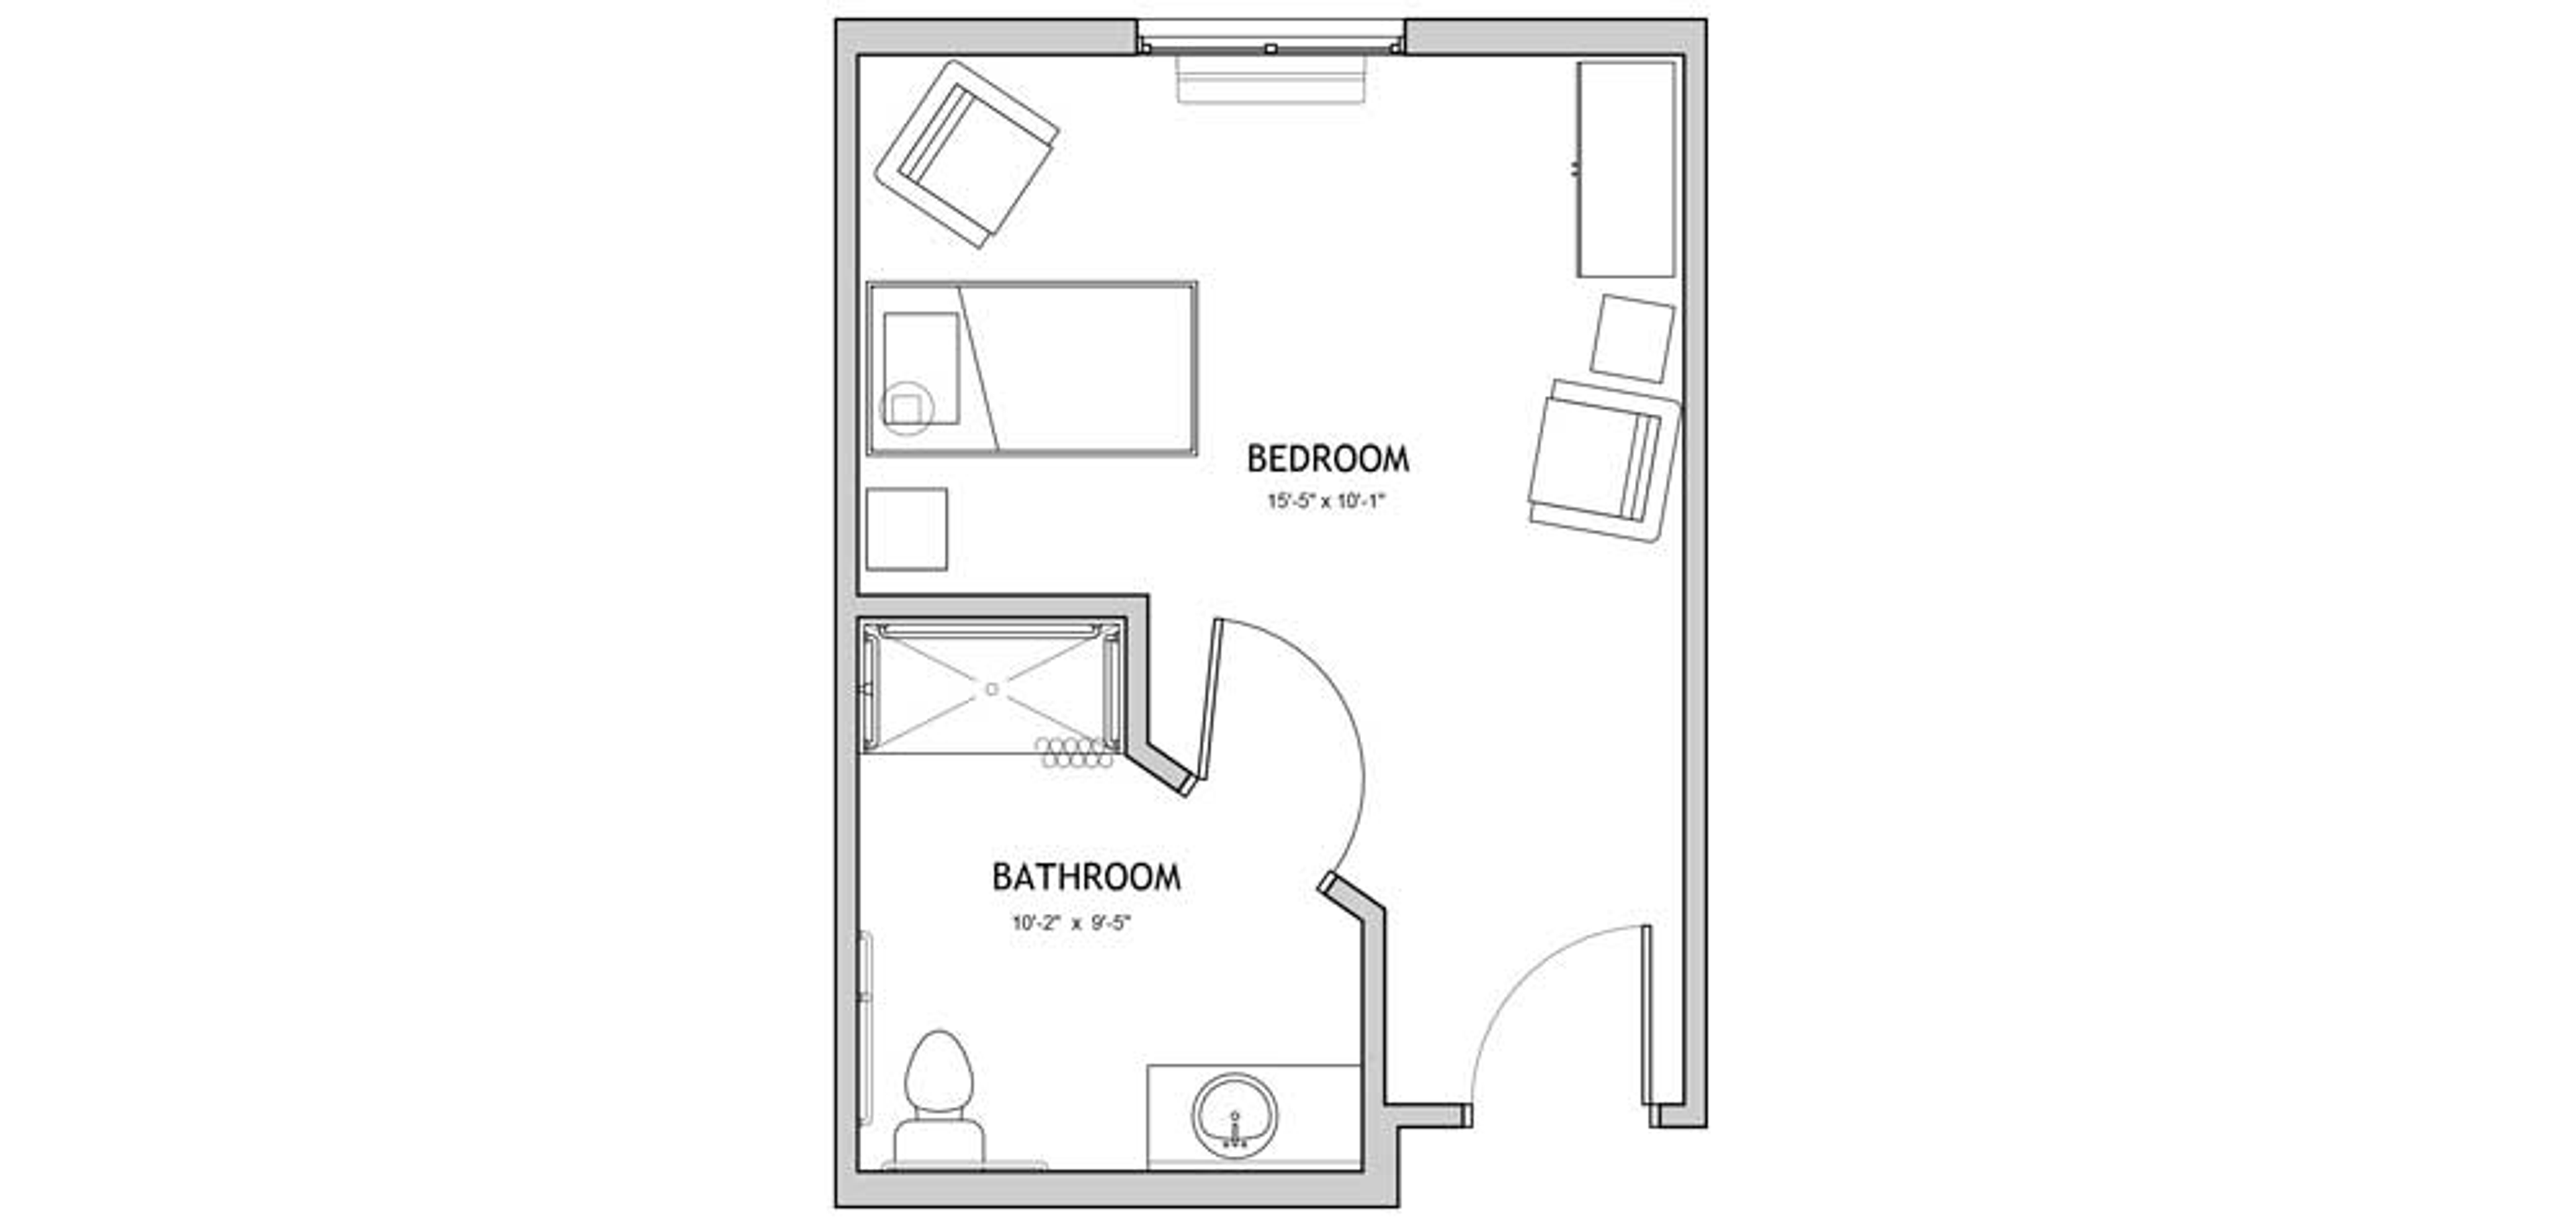 Floorplan - The Auberge at Plano - 2 bed, 1 bath, 342 sq. ft. Memory Care